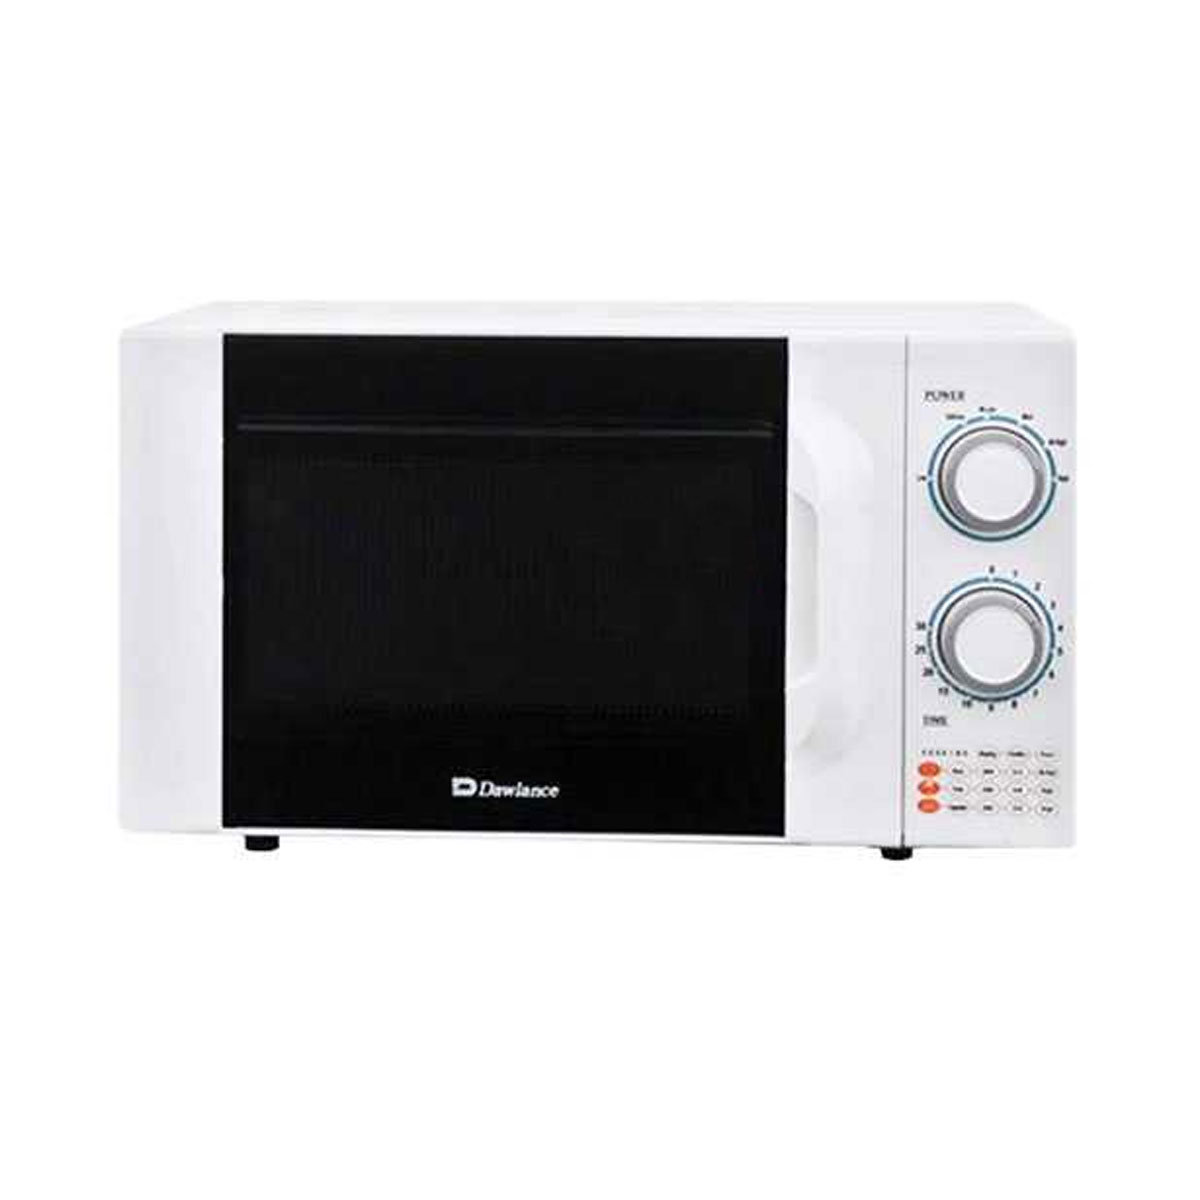 Dawlance DW-MD4 Manual Microwave Oven, 20 Liters